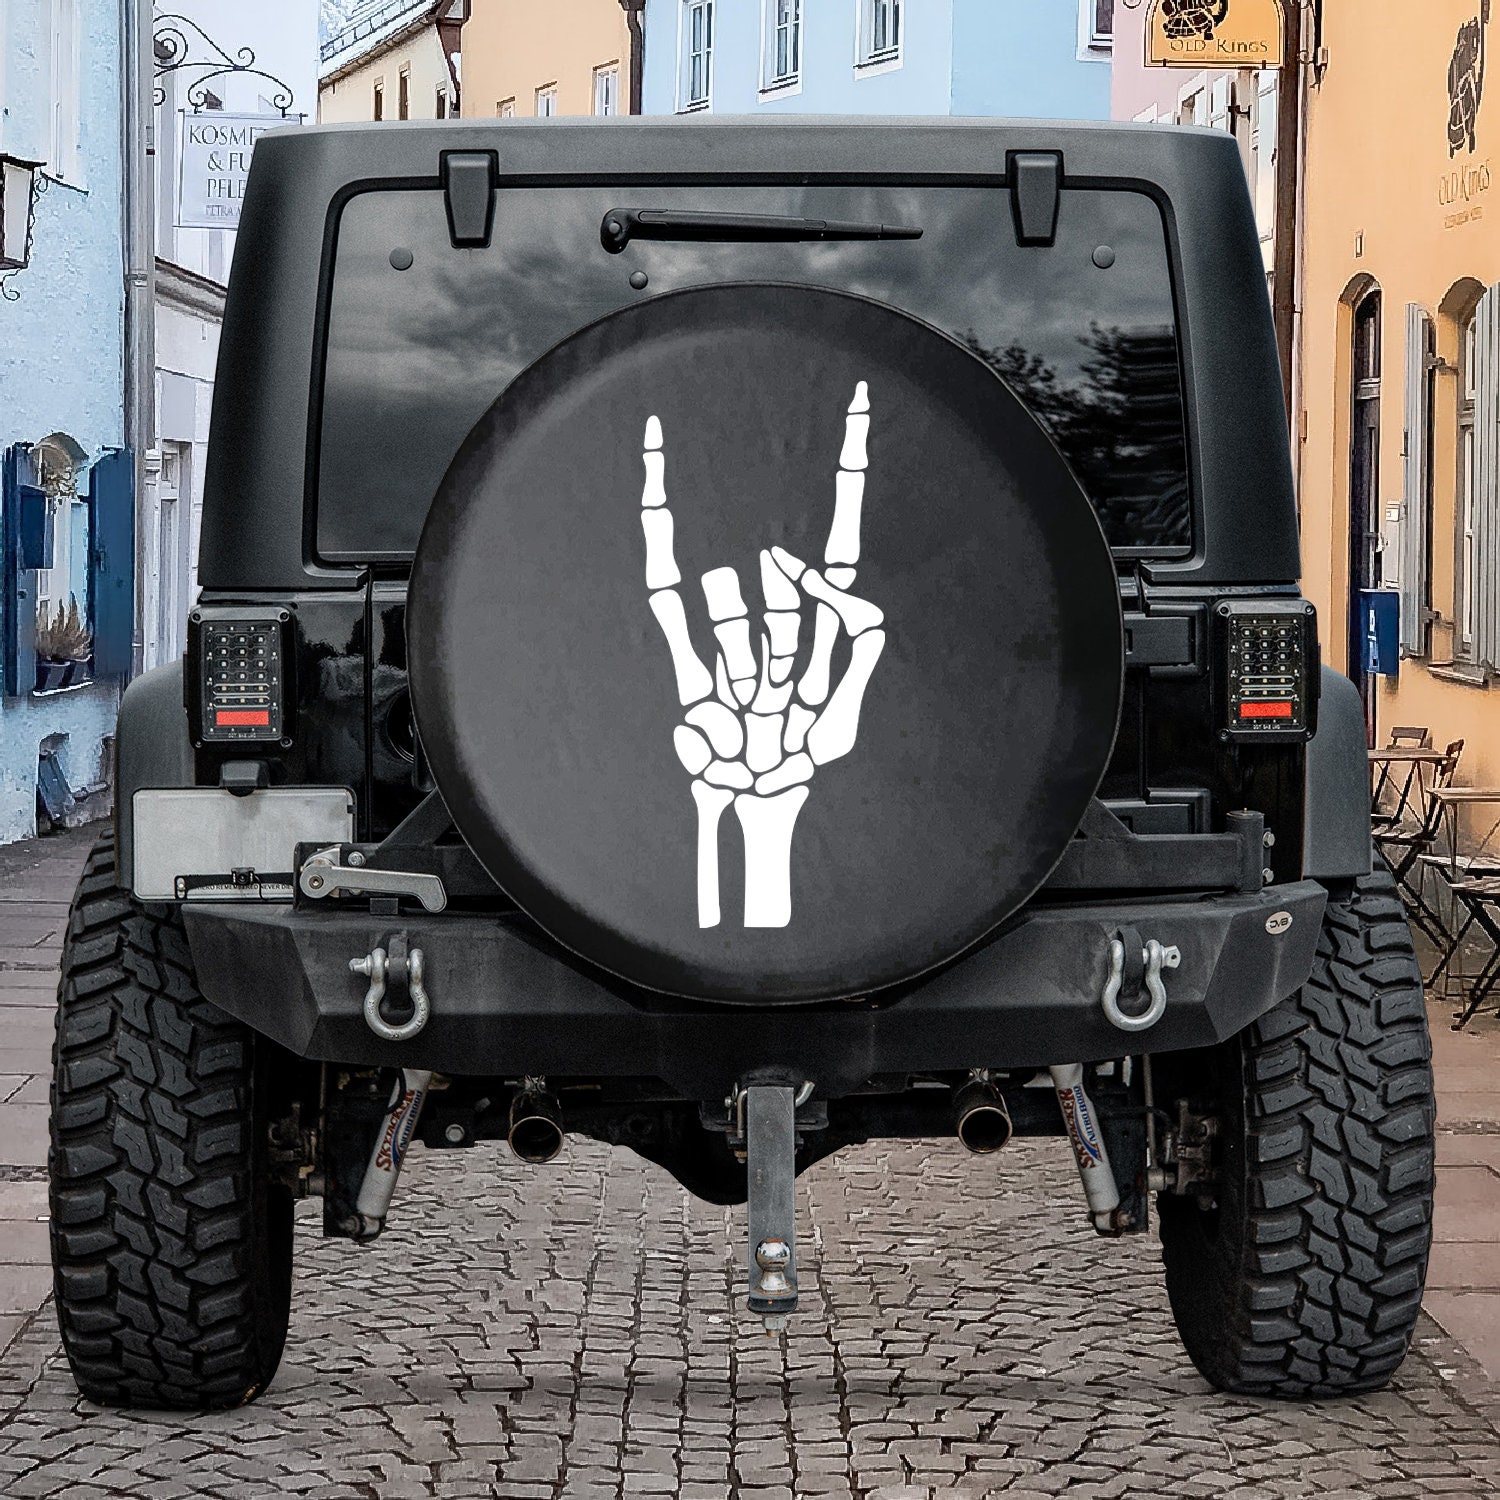 Skeleton Peace Tire Cover | Spare Tire Cover